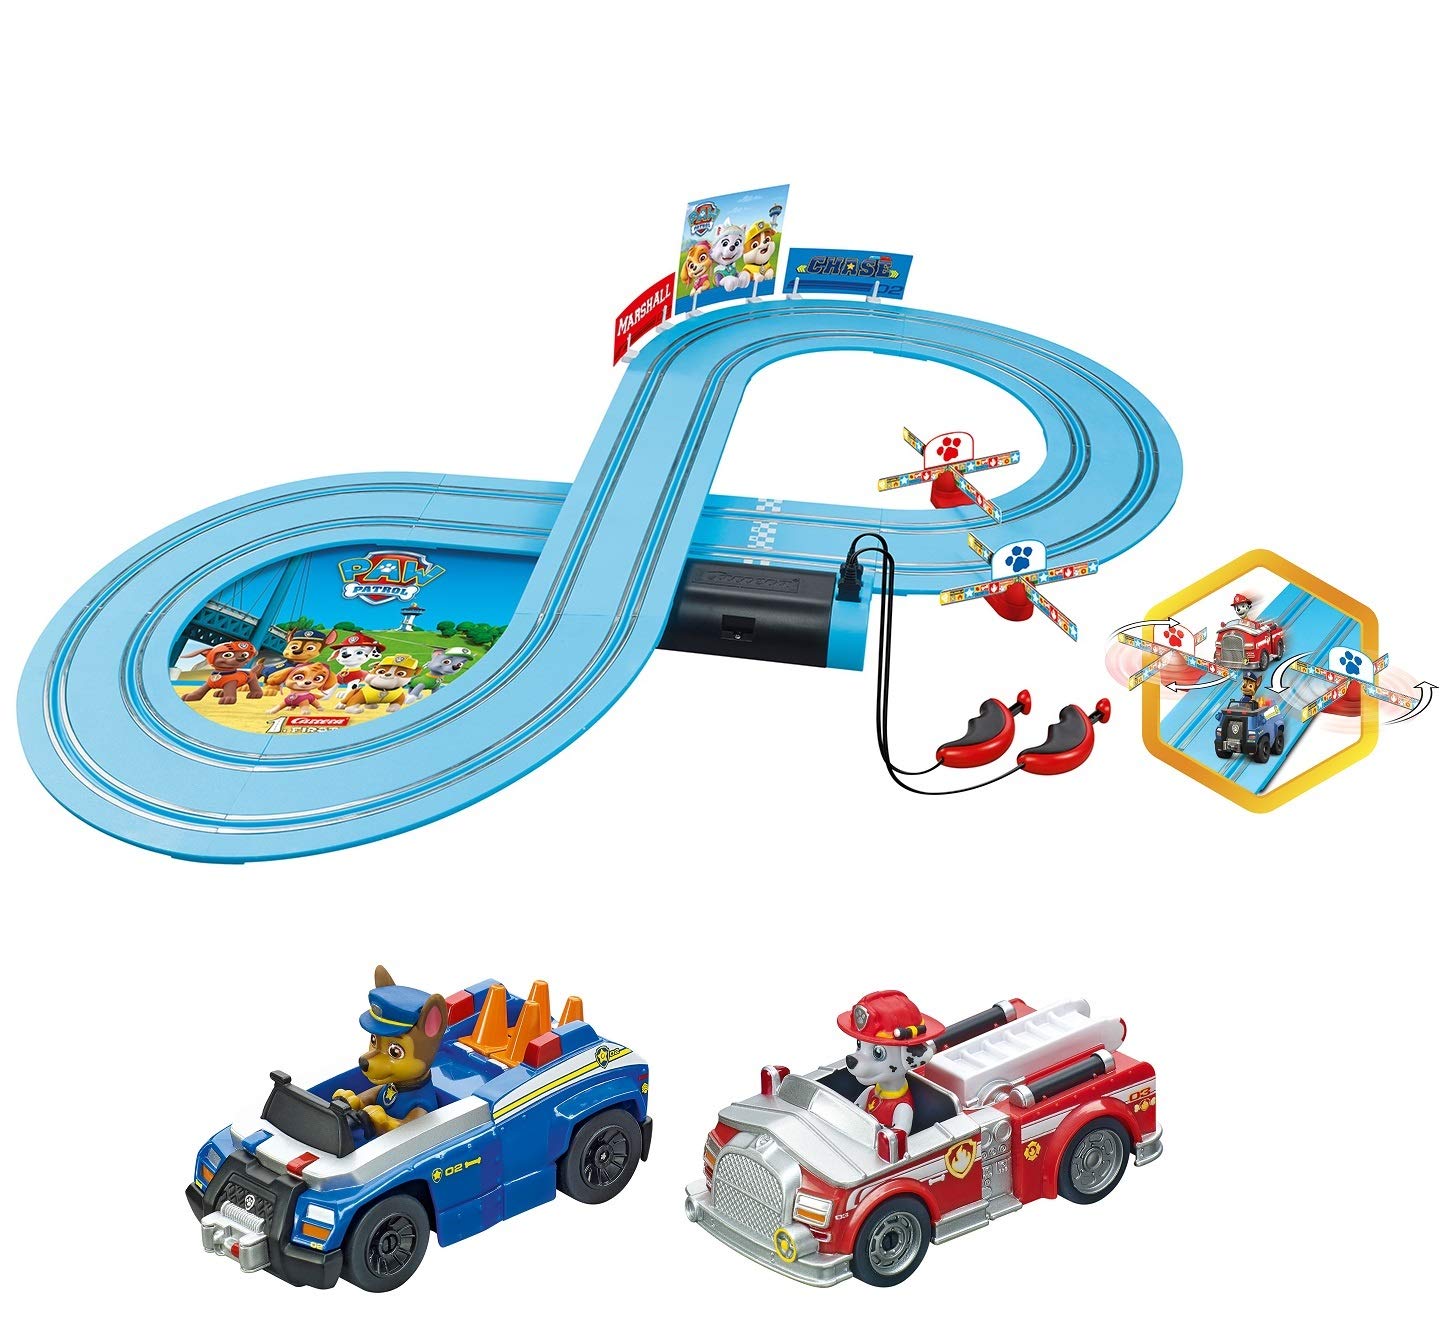 Mua Carrera First Paw Patrol - Slot Car Race Track - Includes 2 Cars: Chase  and Marshall - Battery-Powered Beginner Racing Set for Kids Ages 3 Years  and Up, Multi trên Amazon